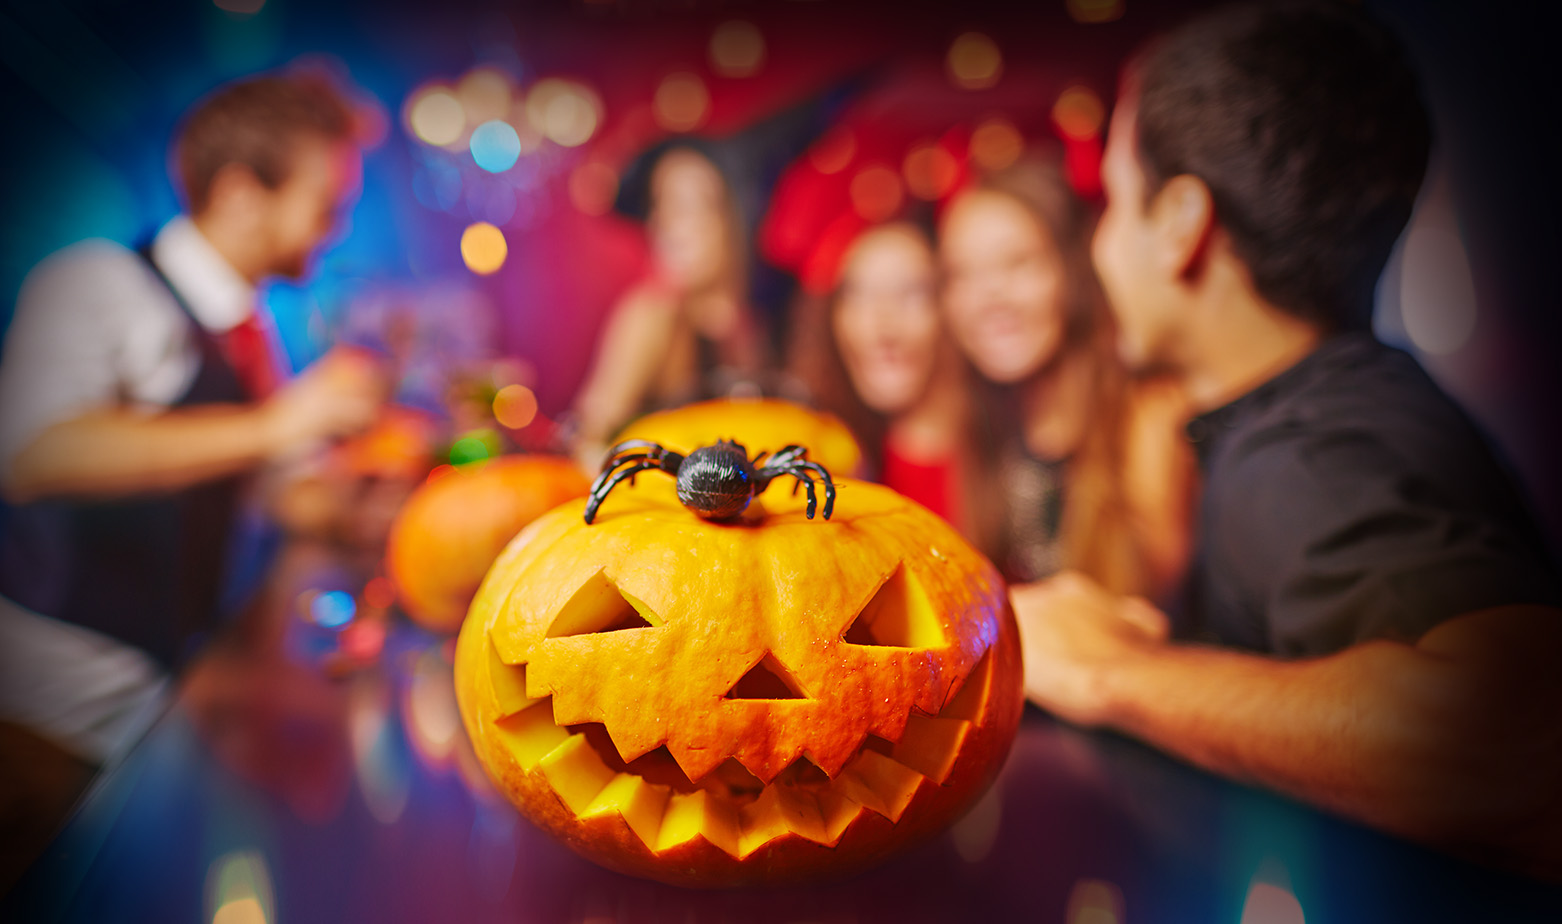 A Jack-O-Lantern sits on a party table with a plastic spider on top of it seemingly at a work Halloween party